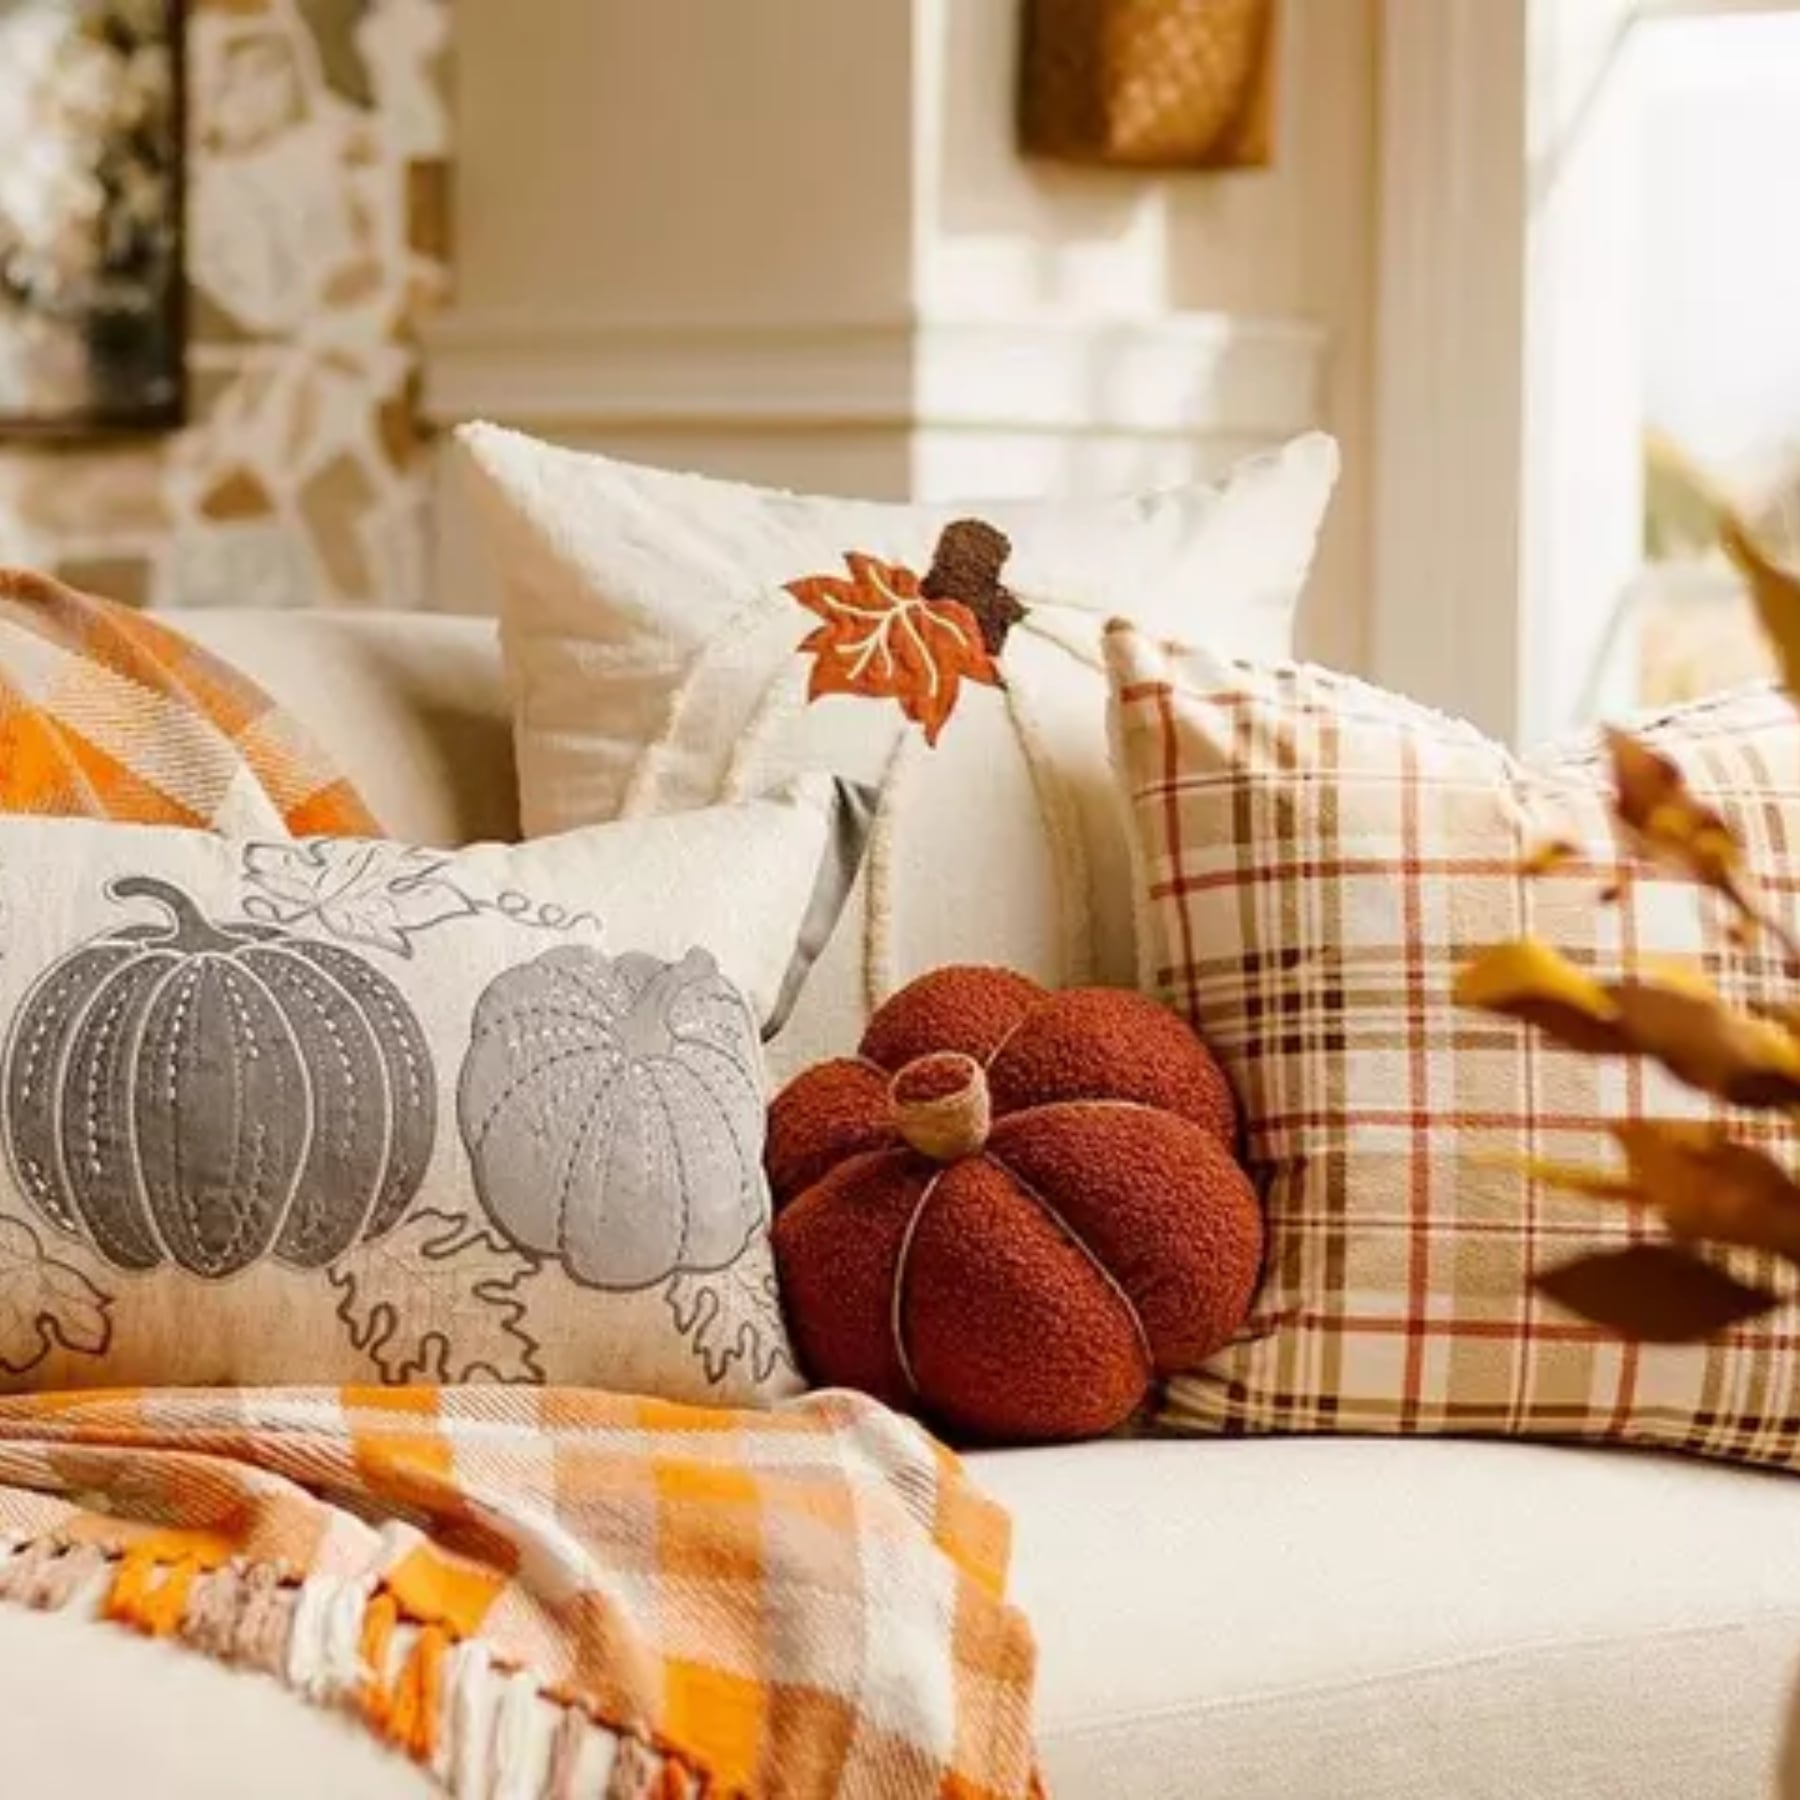 create cozy seating areas to relax and chat after your thanksgiving feast